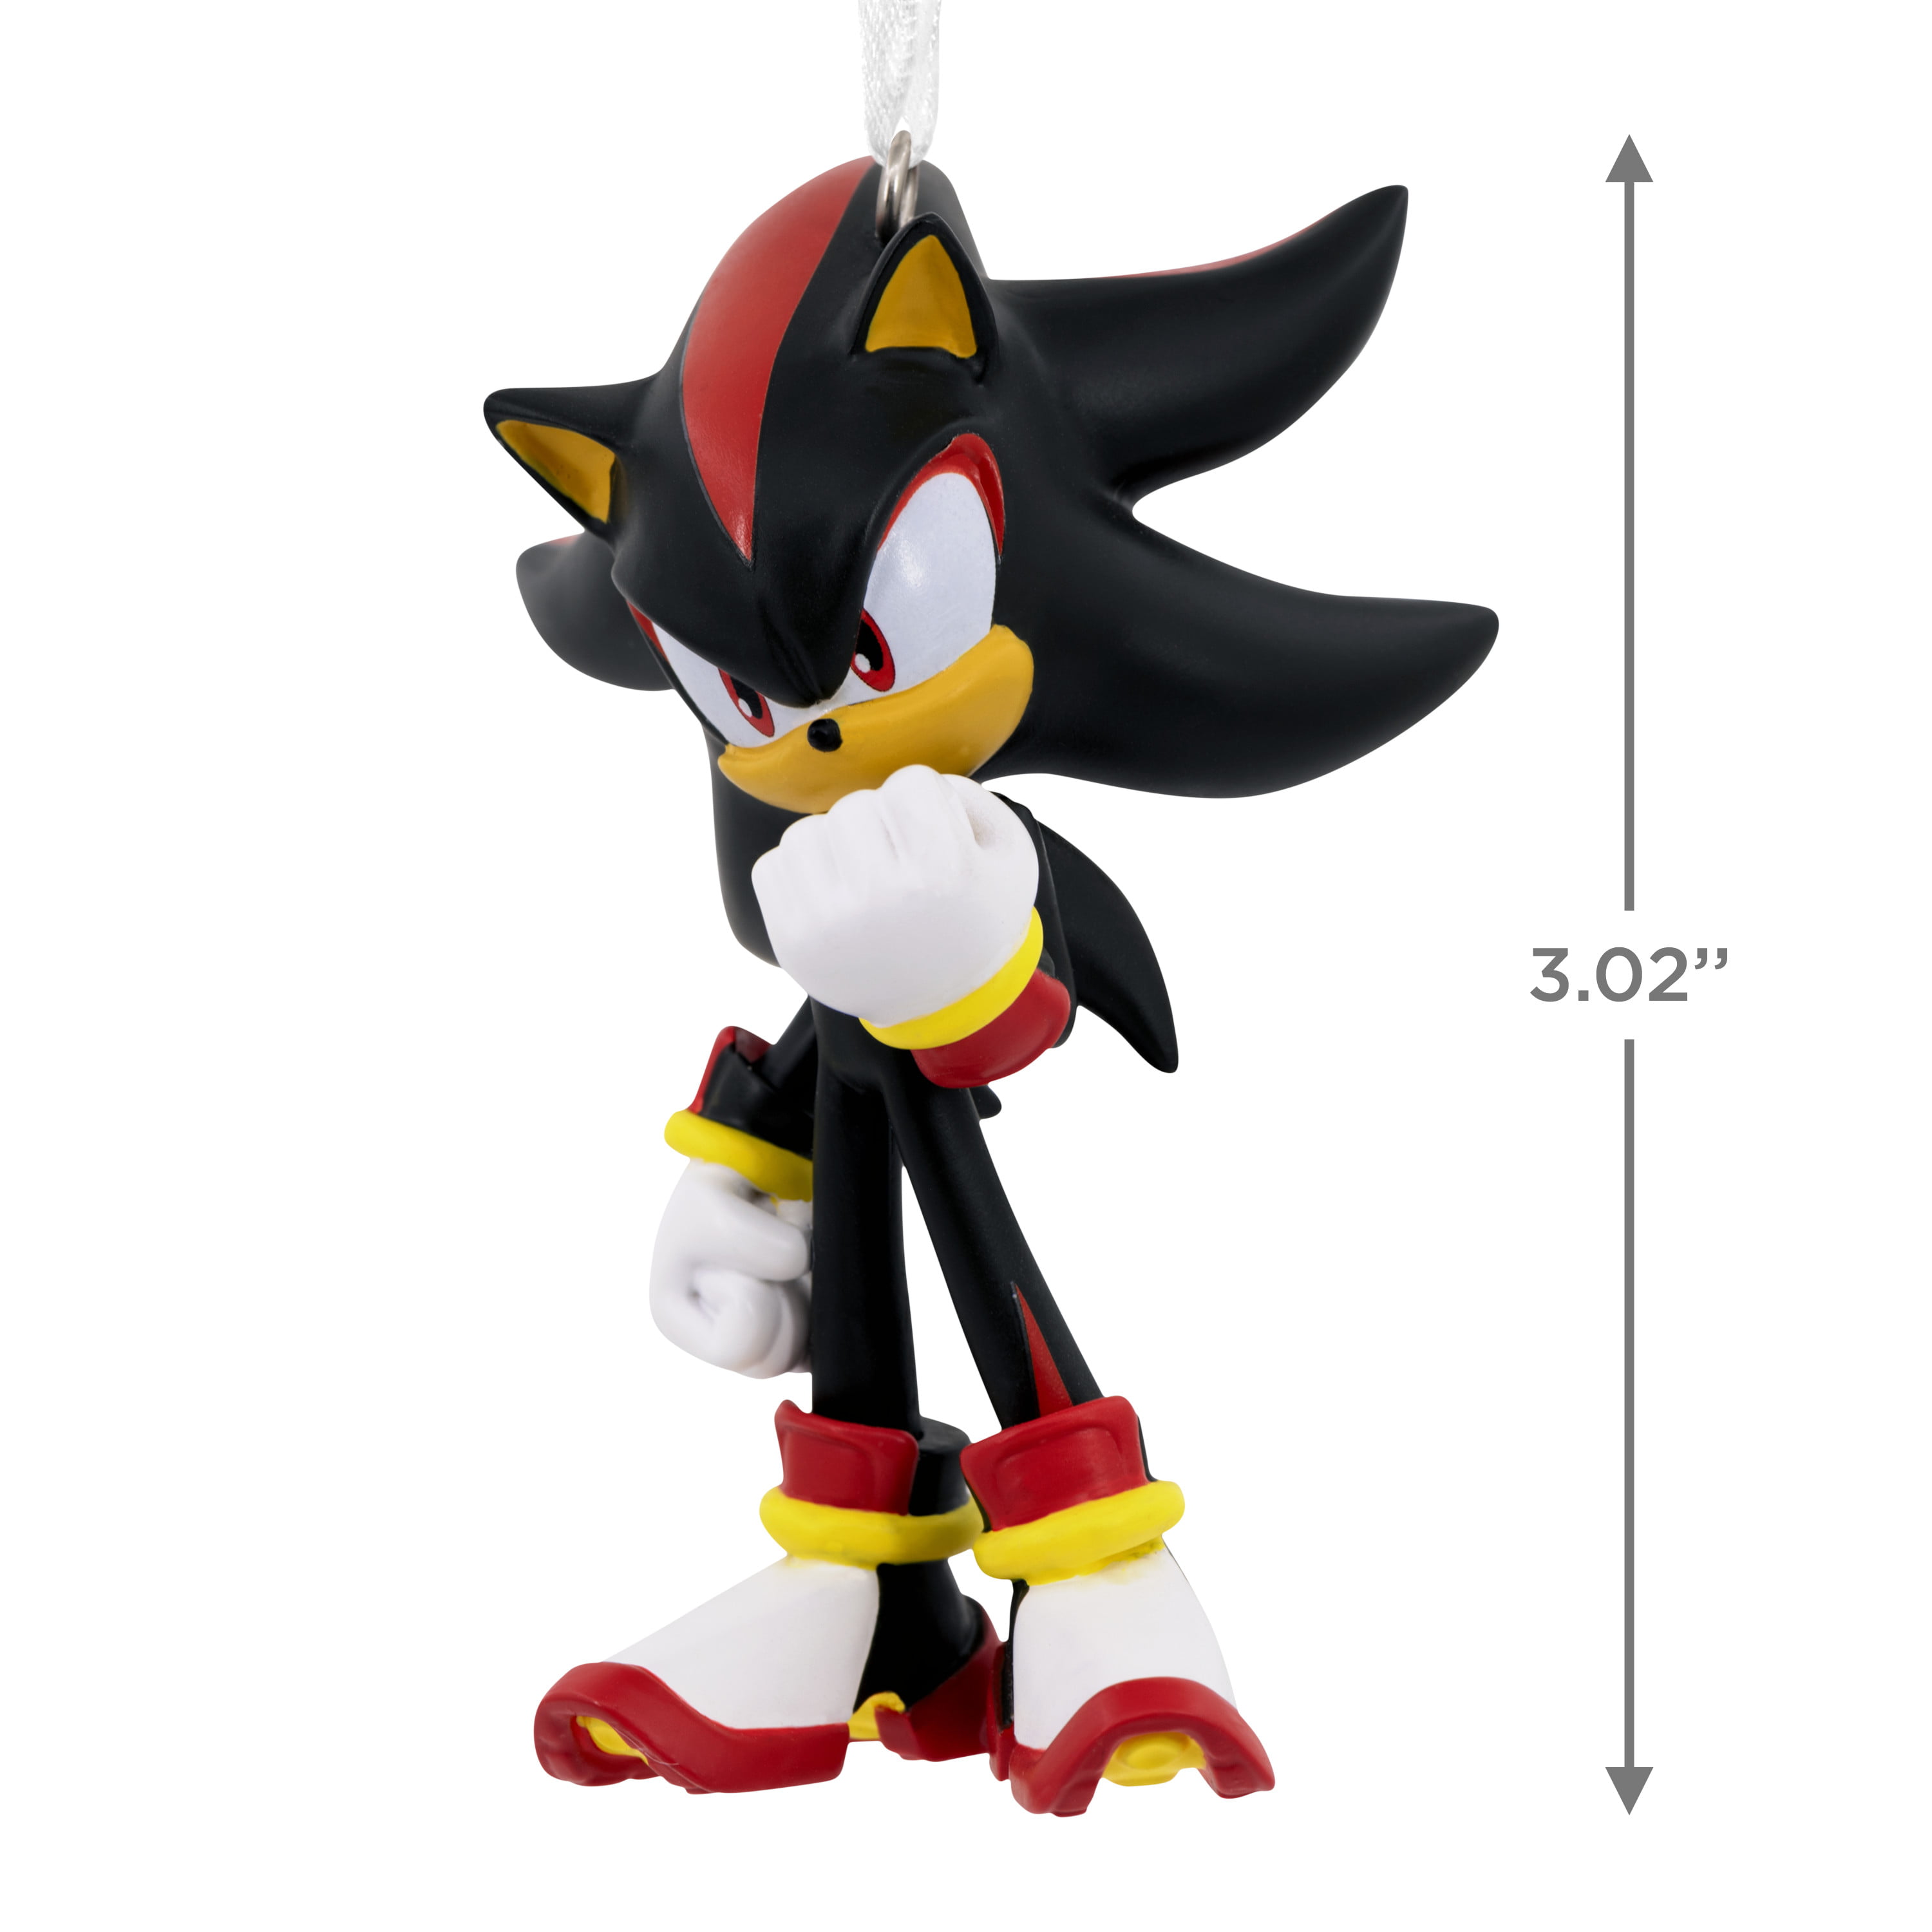 Shadow the Hedgehog in a Sonic X pose